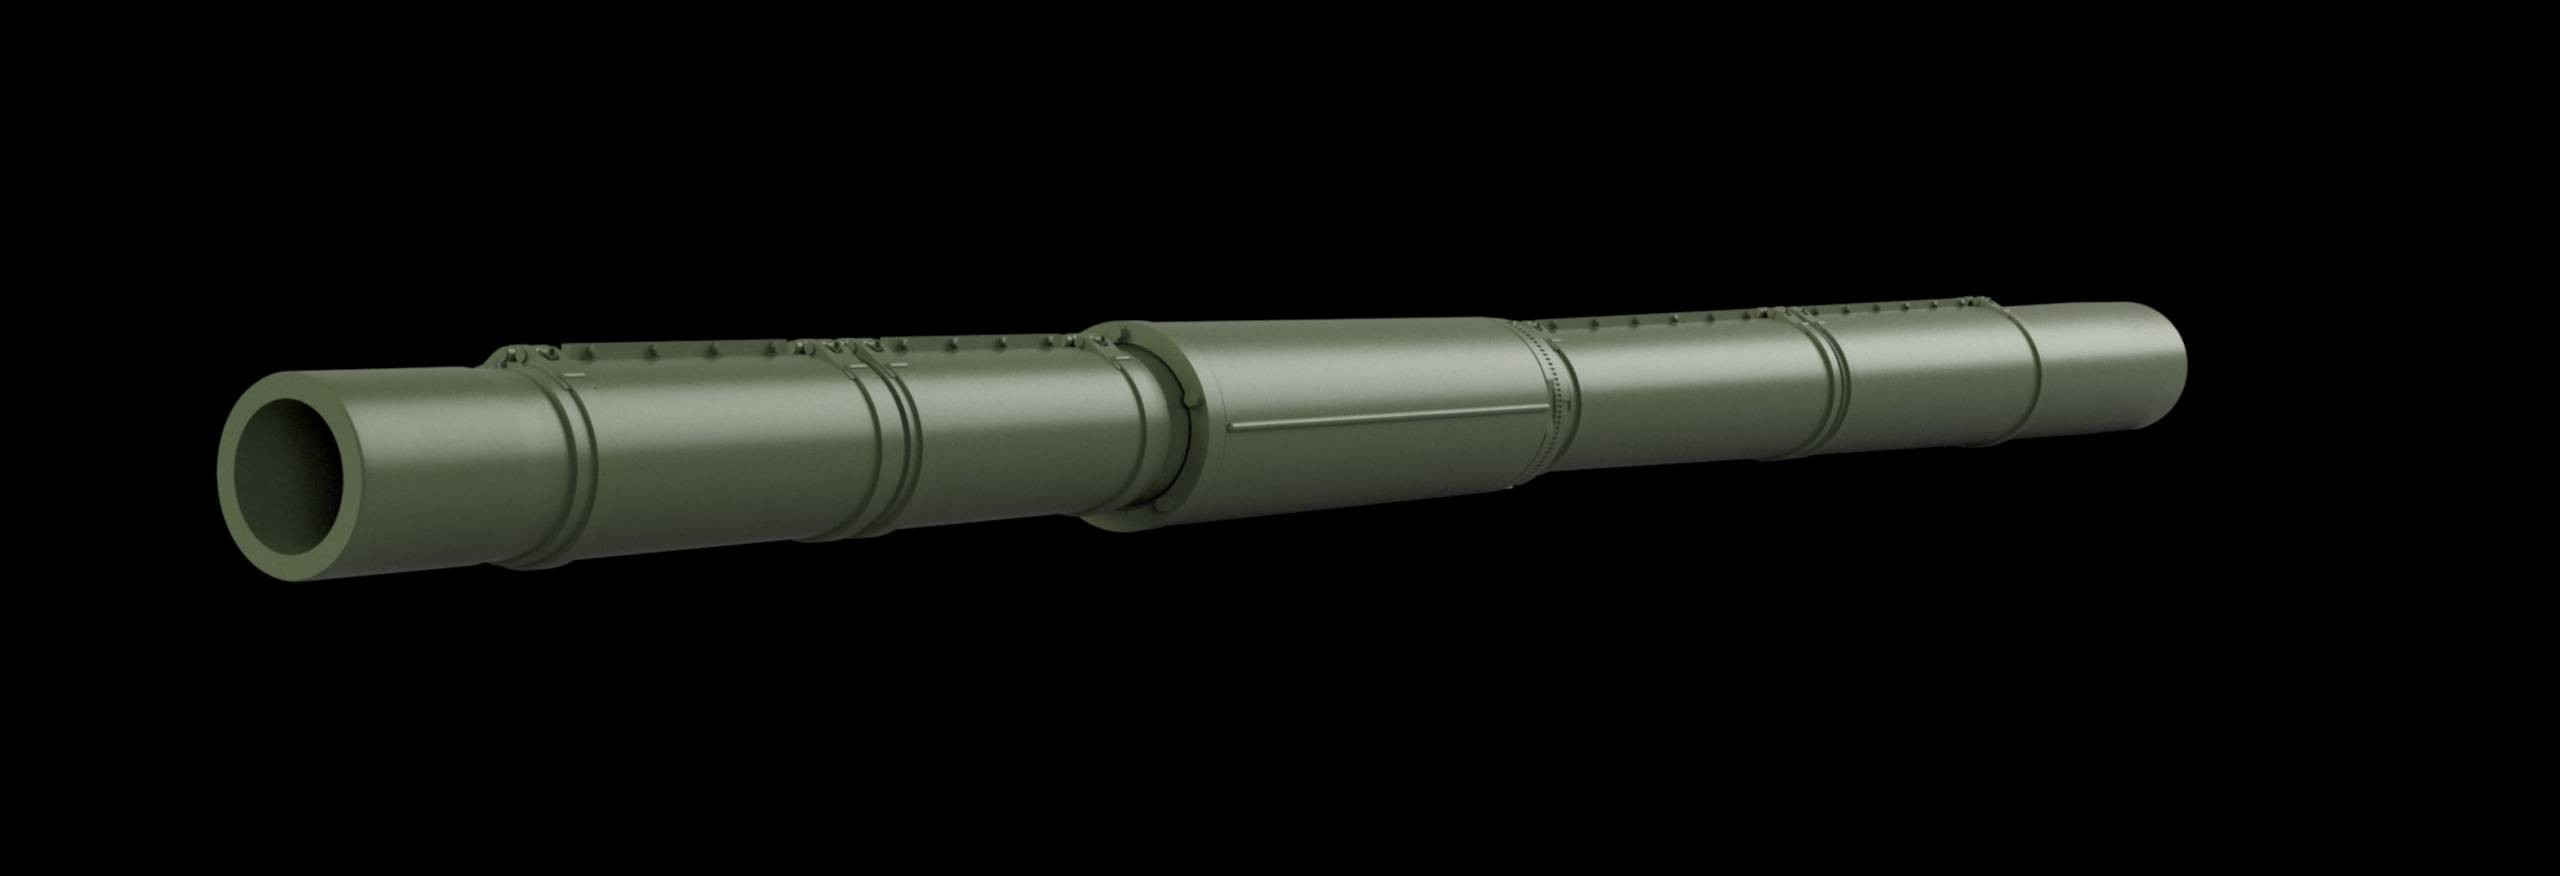 GB35-109 2A20 Gun barrel with thermal sleeve for T-62 MBT